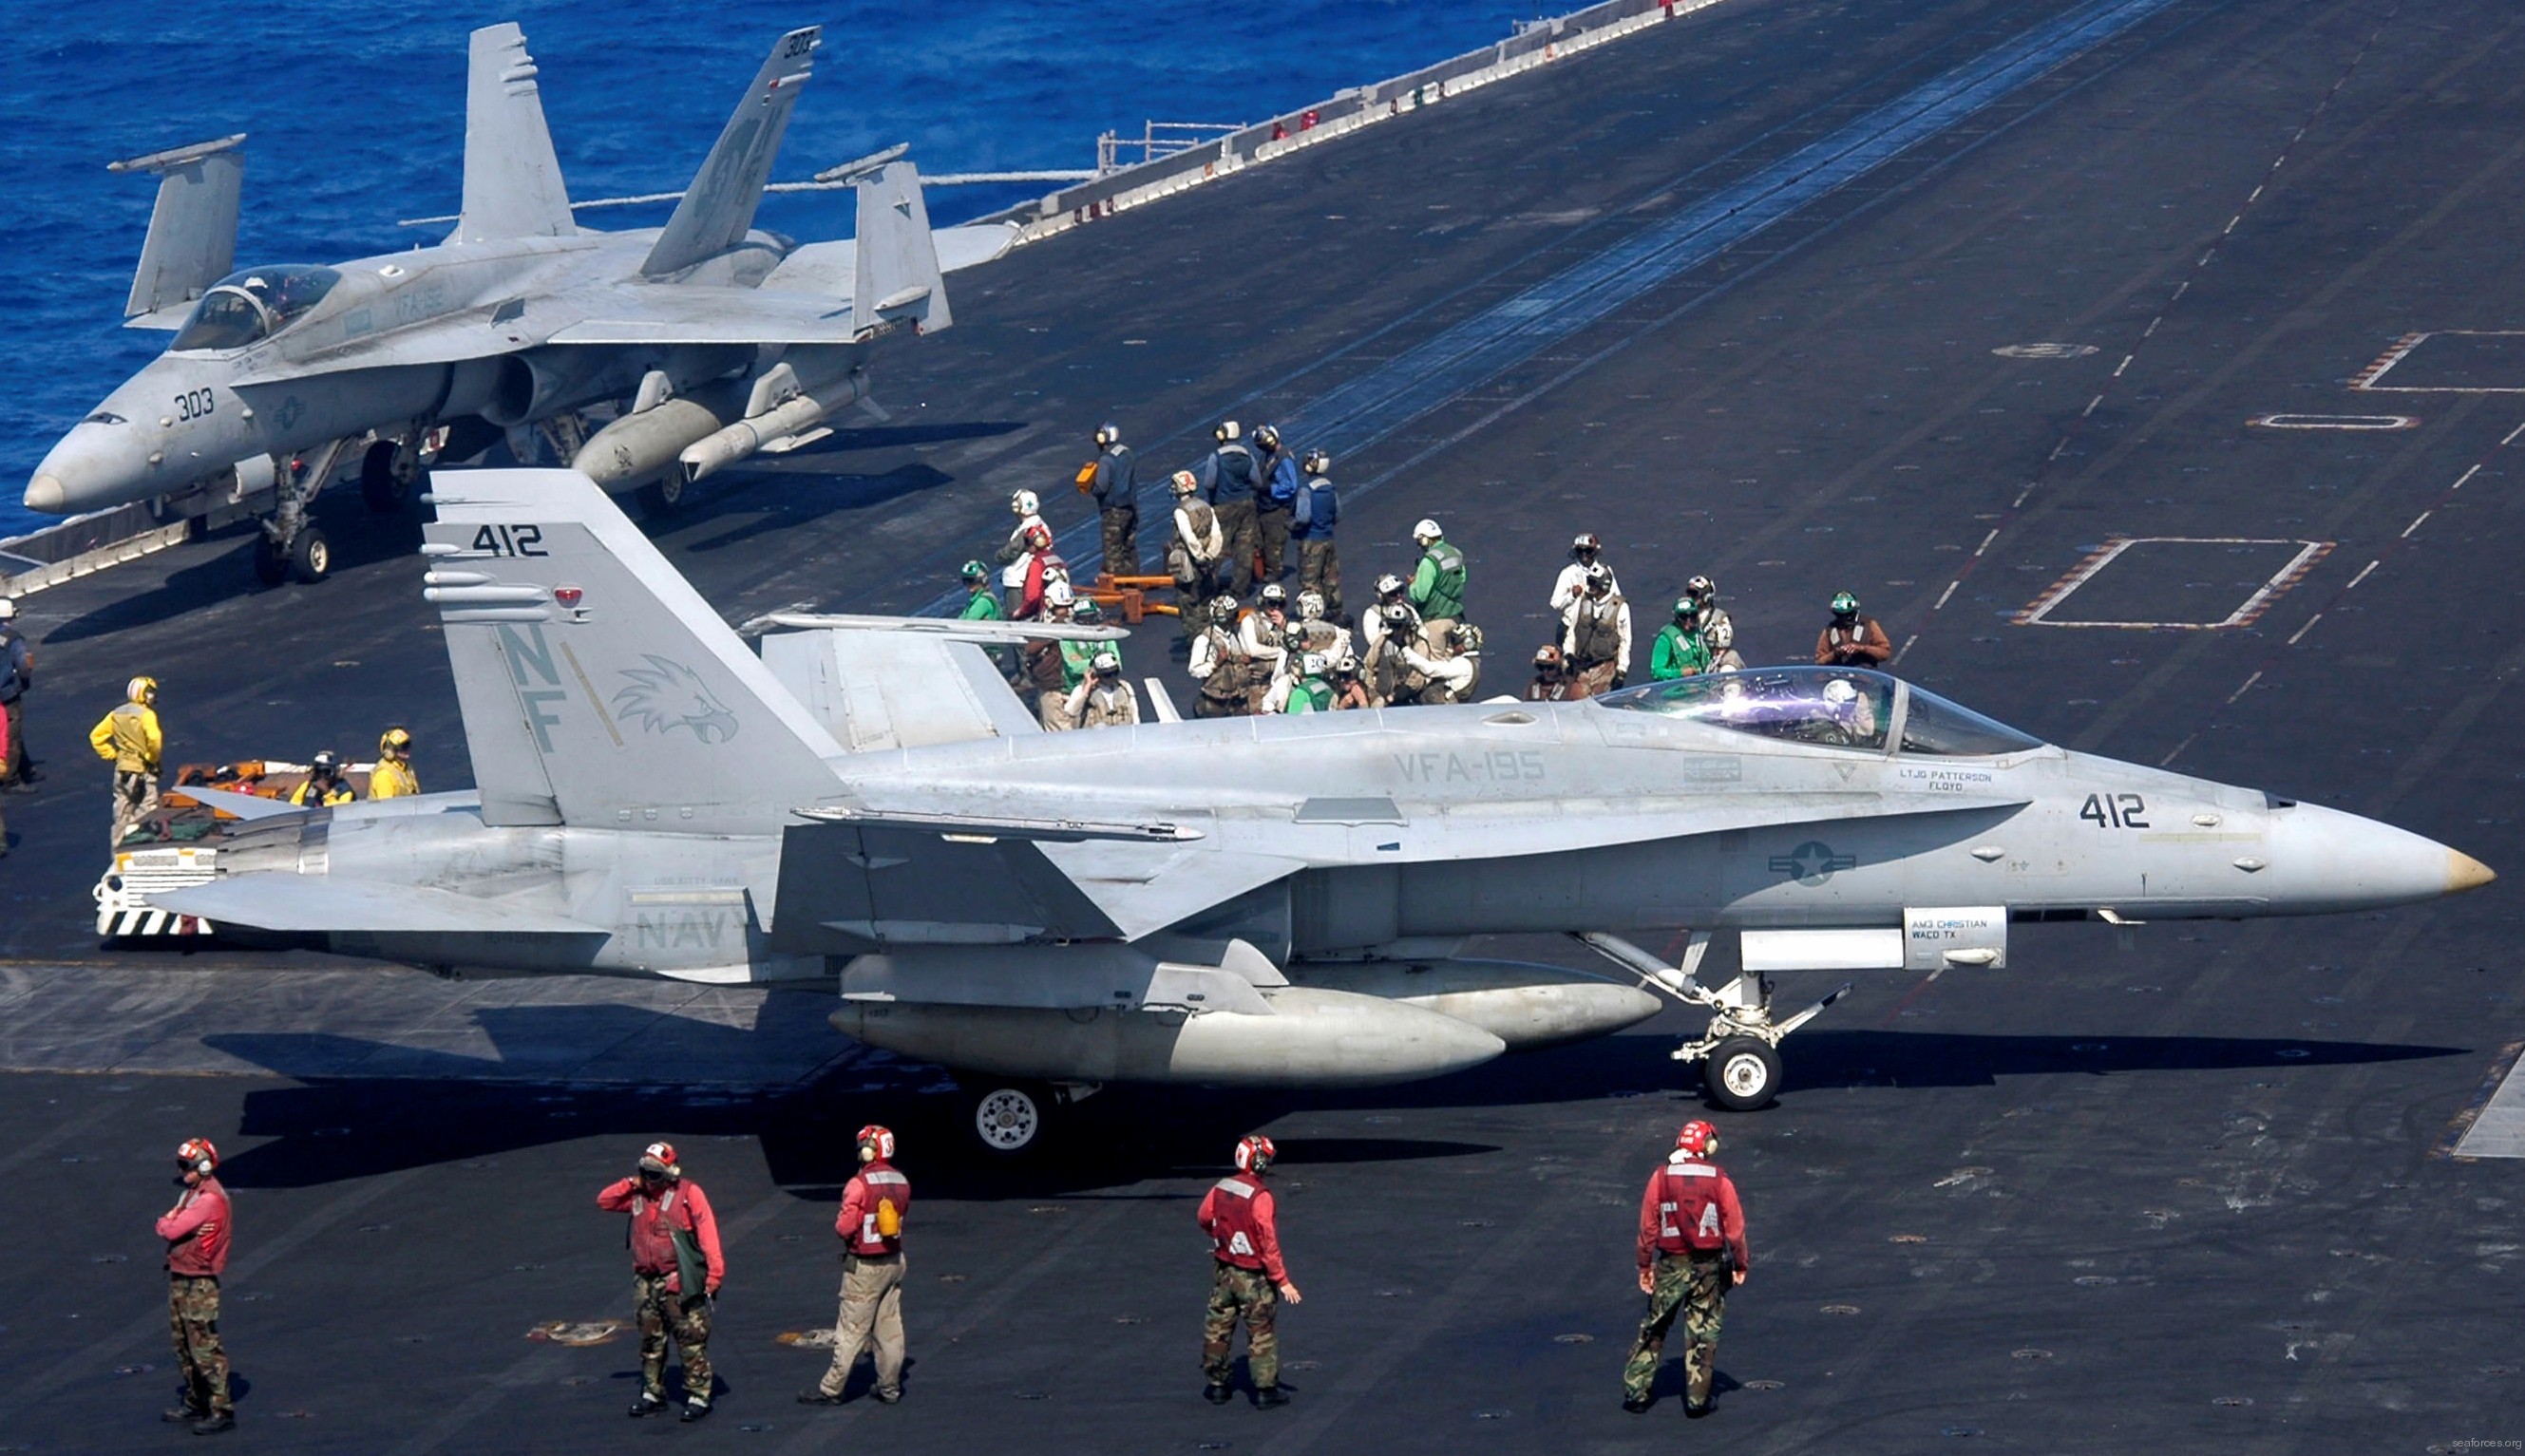 vfa-195 dambusters strike fighter squadron navy f/a-18c hornet carrier air wing cvw-5 uss kitty hawk cv-63 70